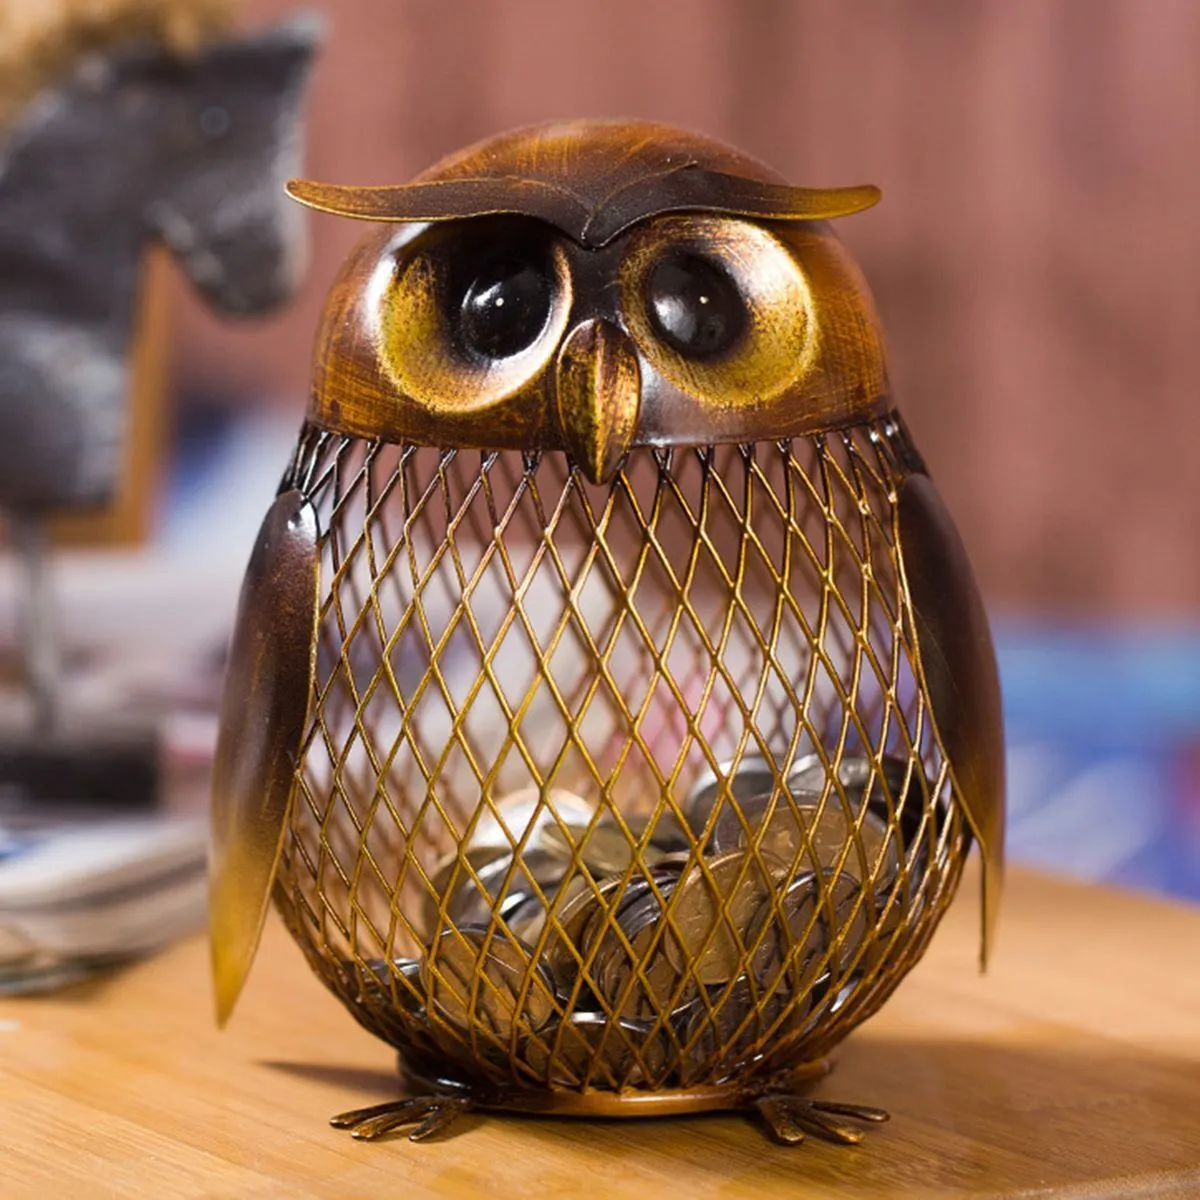 Annan heminredning Tooarts Piggy Bank Owl Figurin Money Box Metal Coin Saving Home Decoration Crafts Gift For Coins Year Decorations Y200106